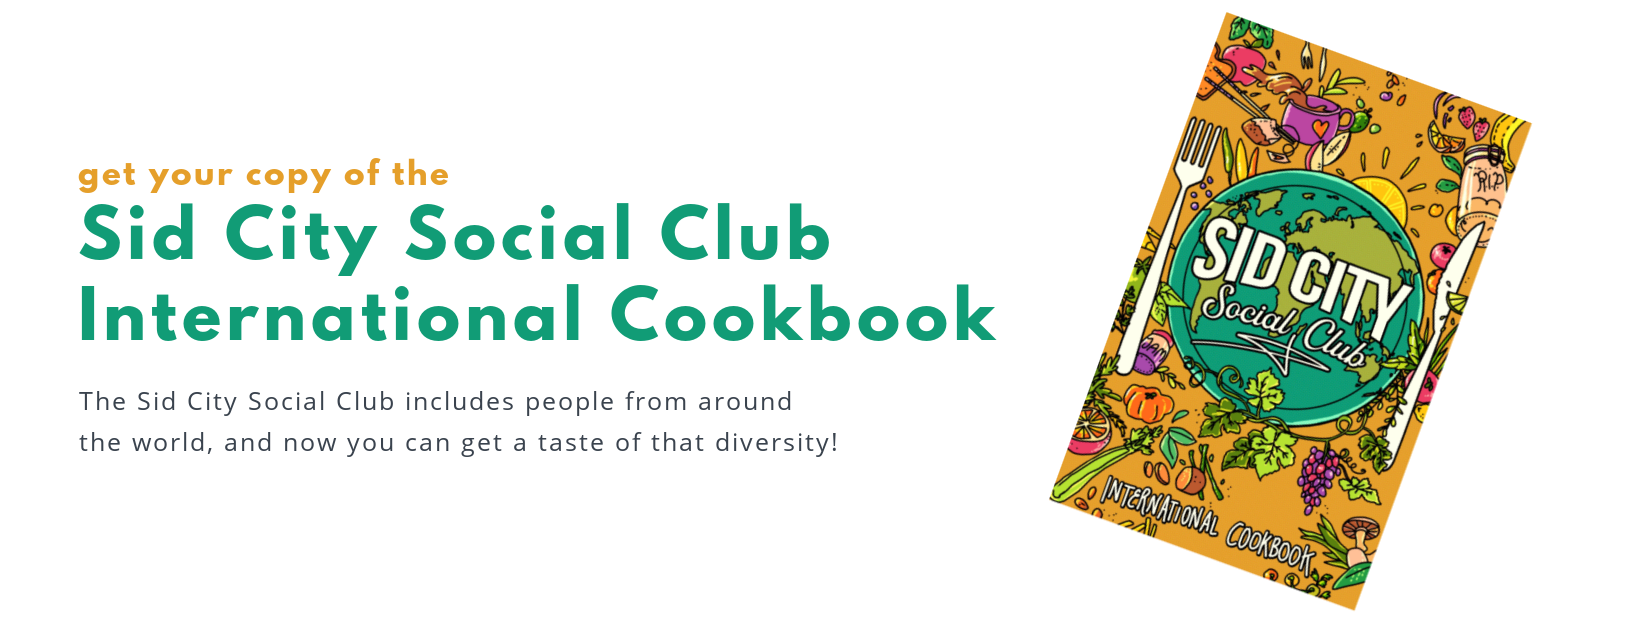 Get your copy of the Sid City Social Club International Cookbook